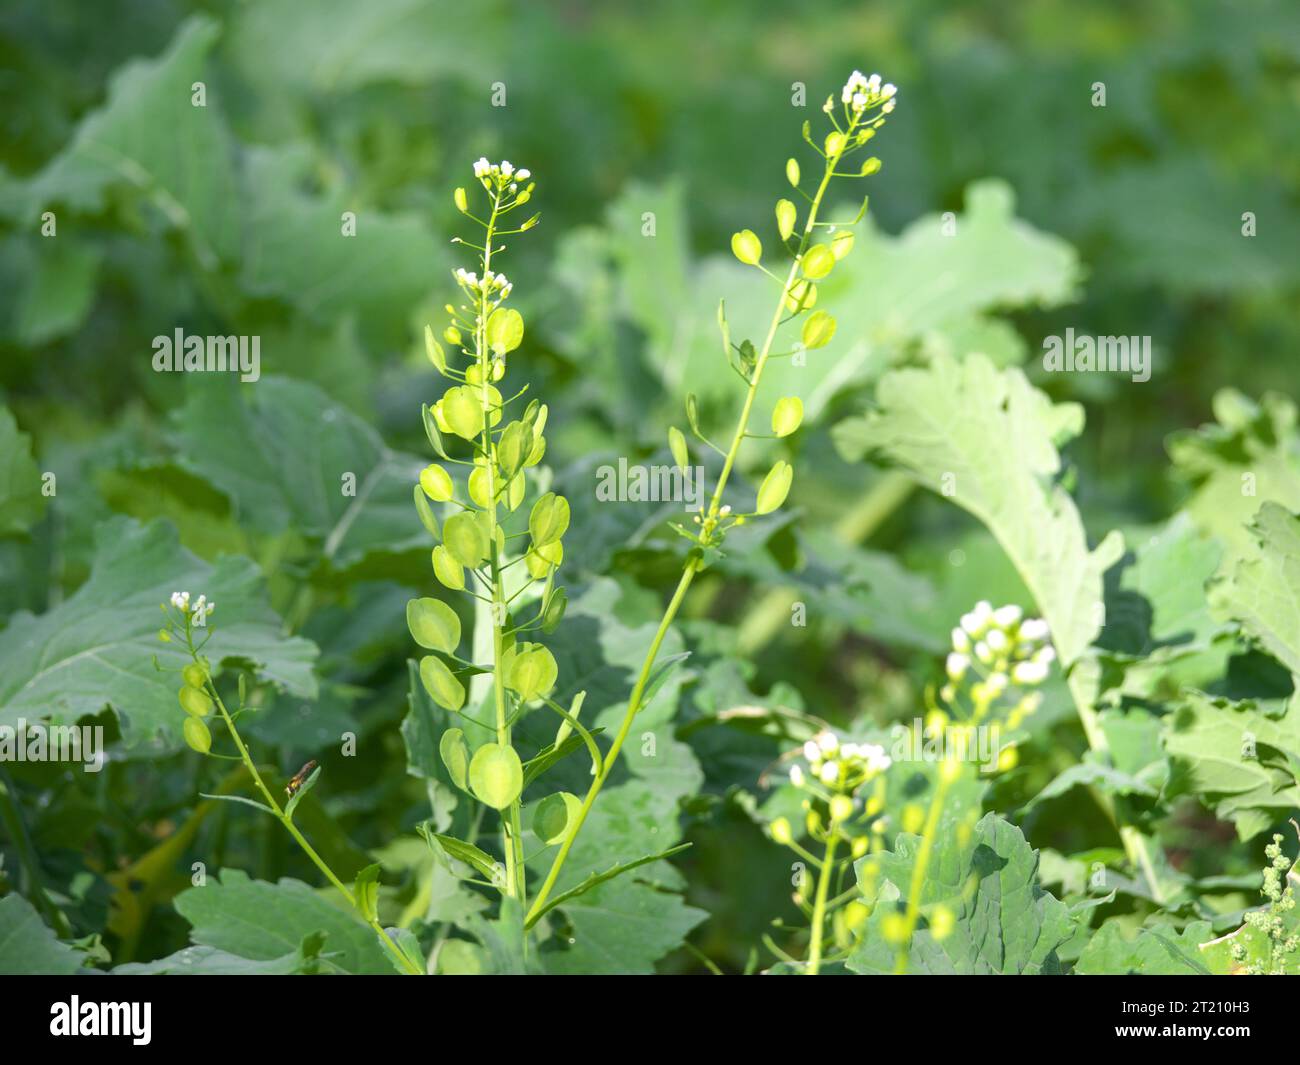 Celandine fruits of the field pennywort (Thlaspi arvense) a weed plant or ruderal plant Stock Photo